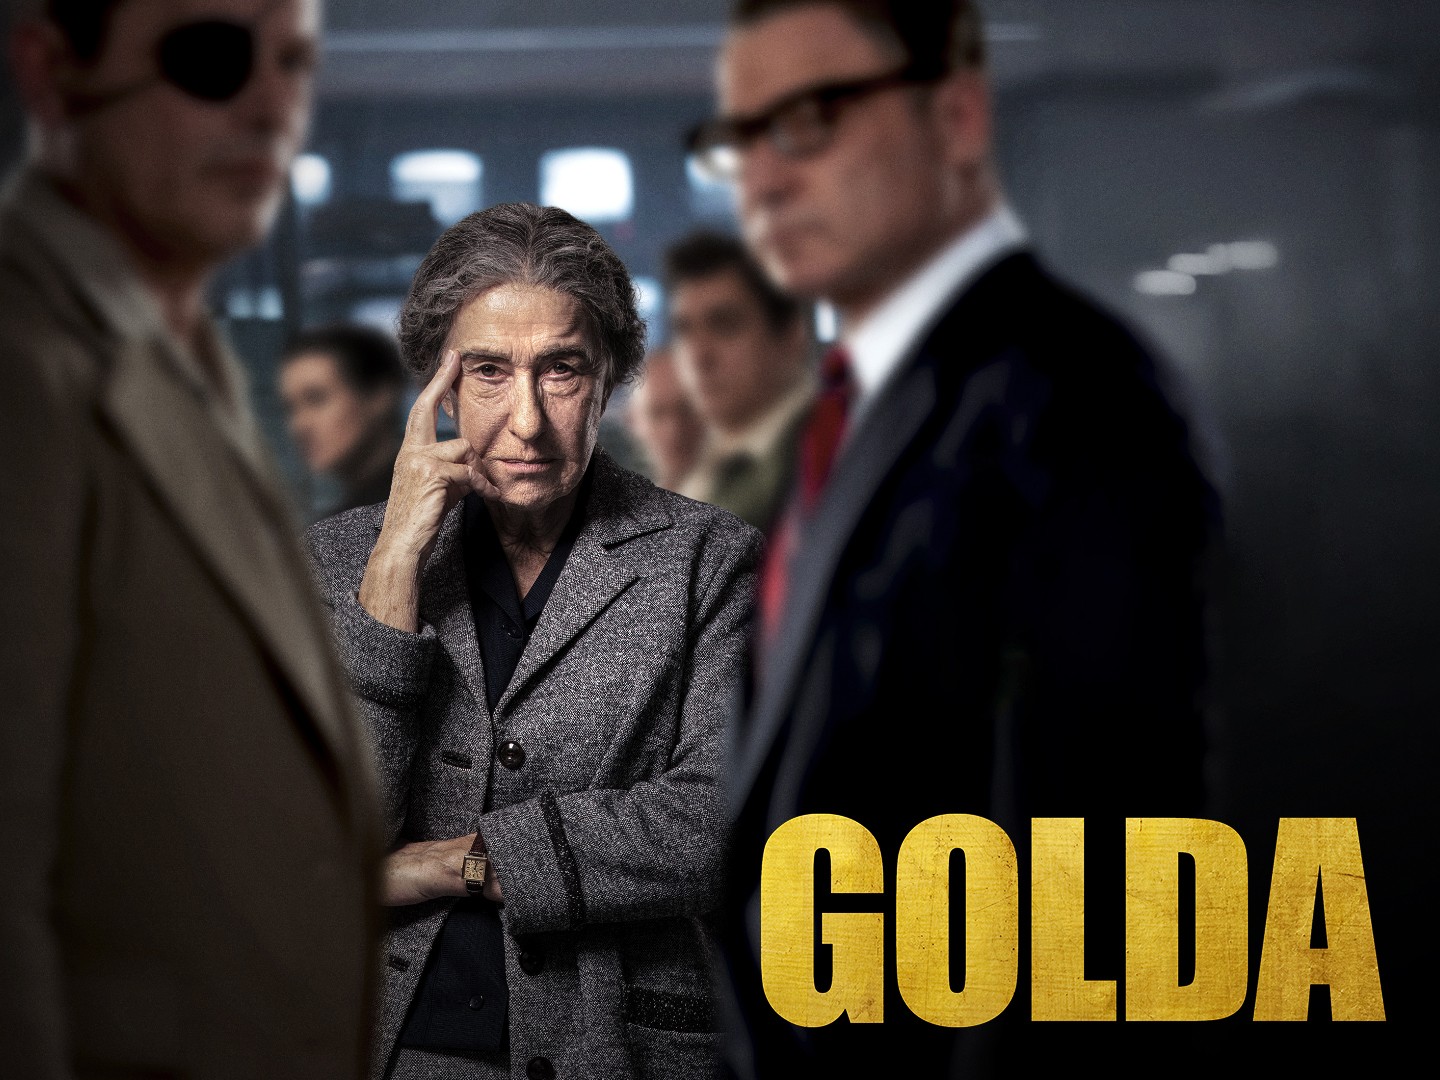 Film Review: 'Golda' is a missed opportunity to examine politics